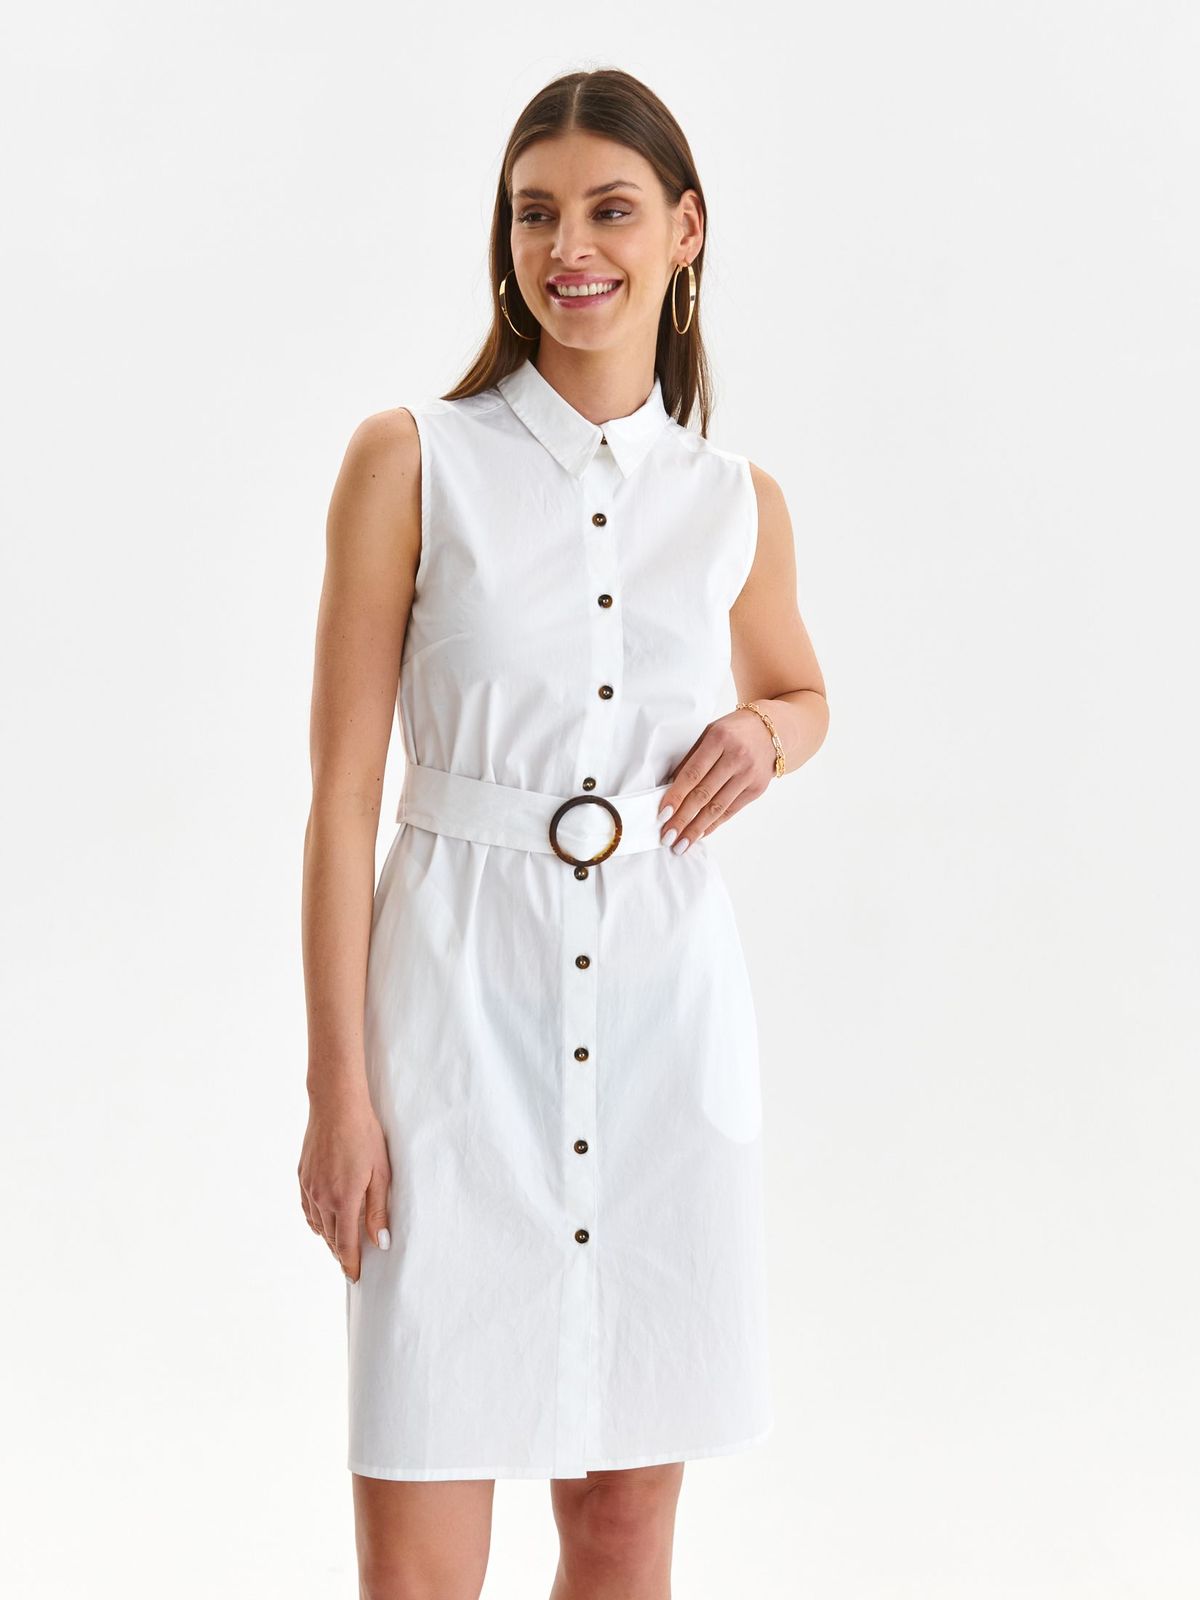 White dress short cut cotton straight accessorized with belt